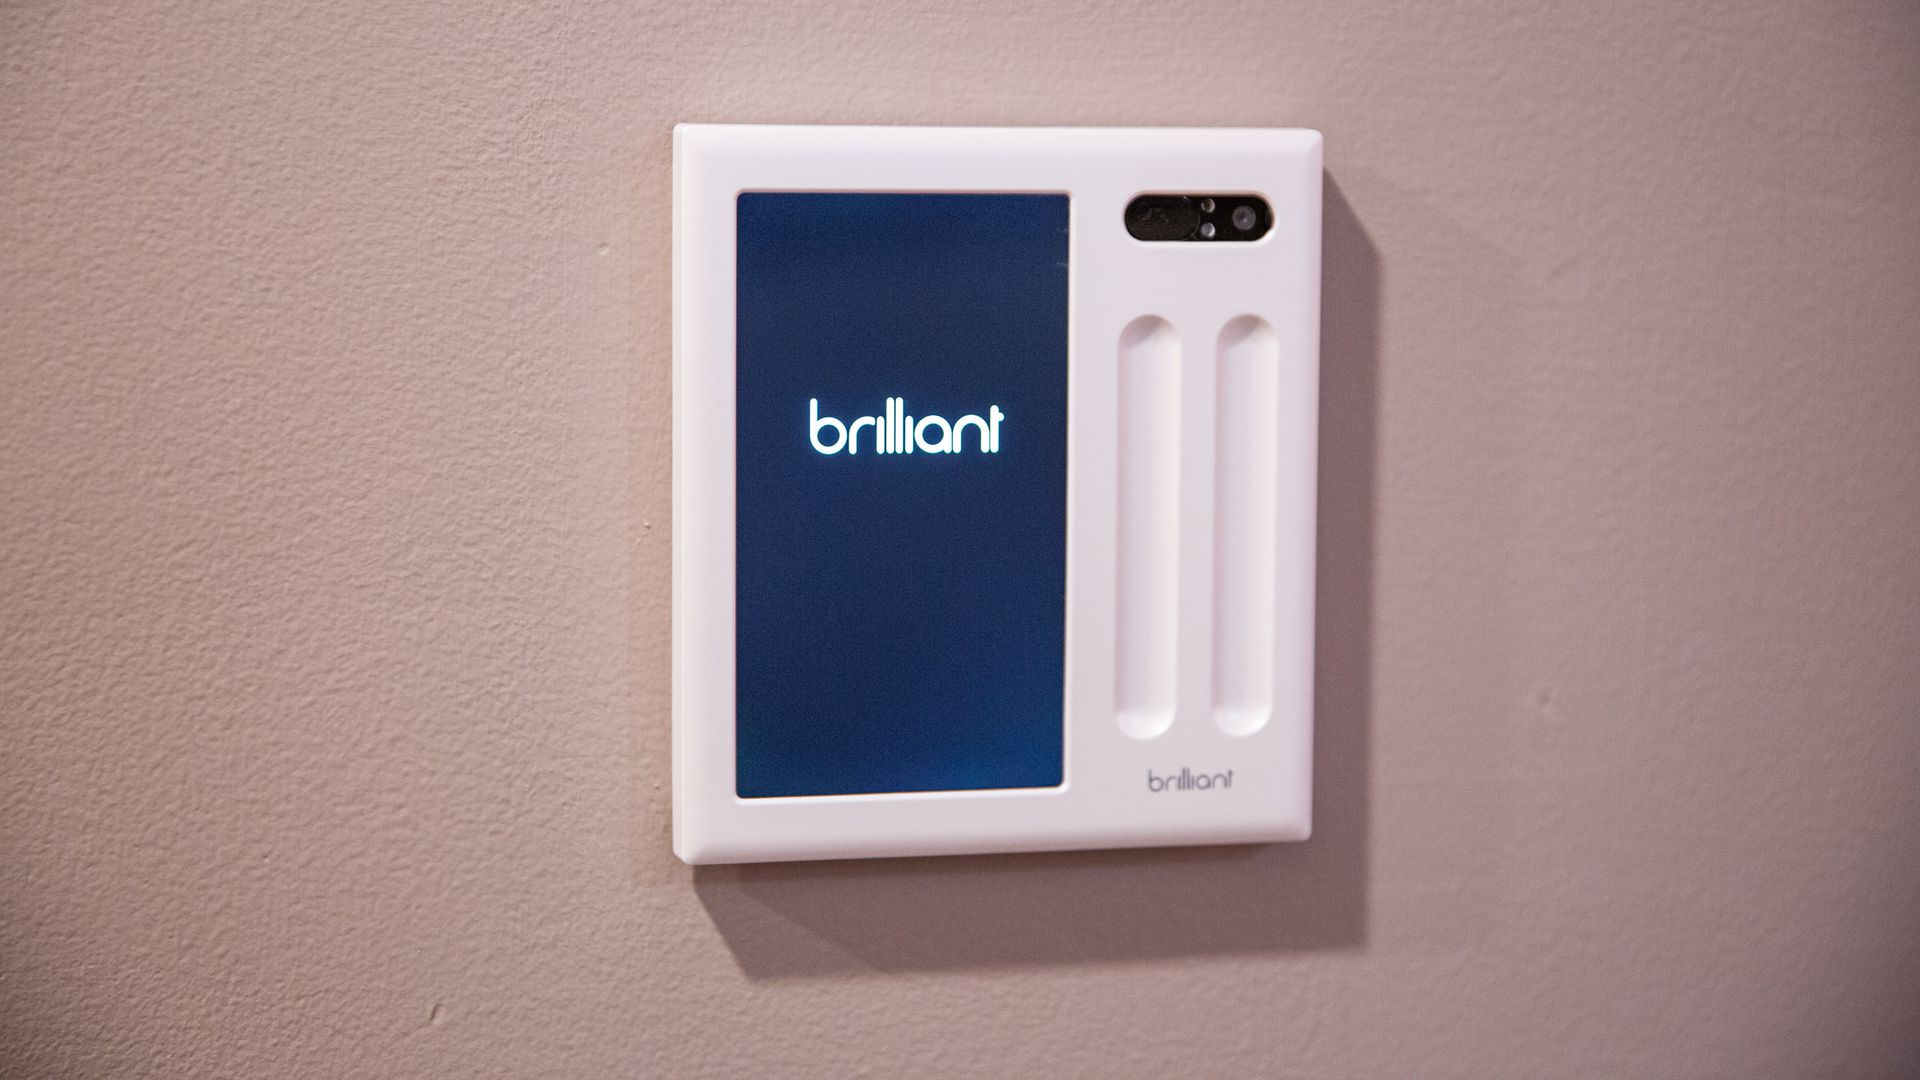 amazon, brilliant’s $400 smart switches are still working... for now